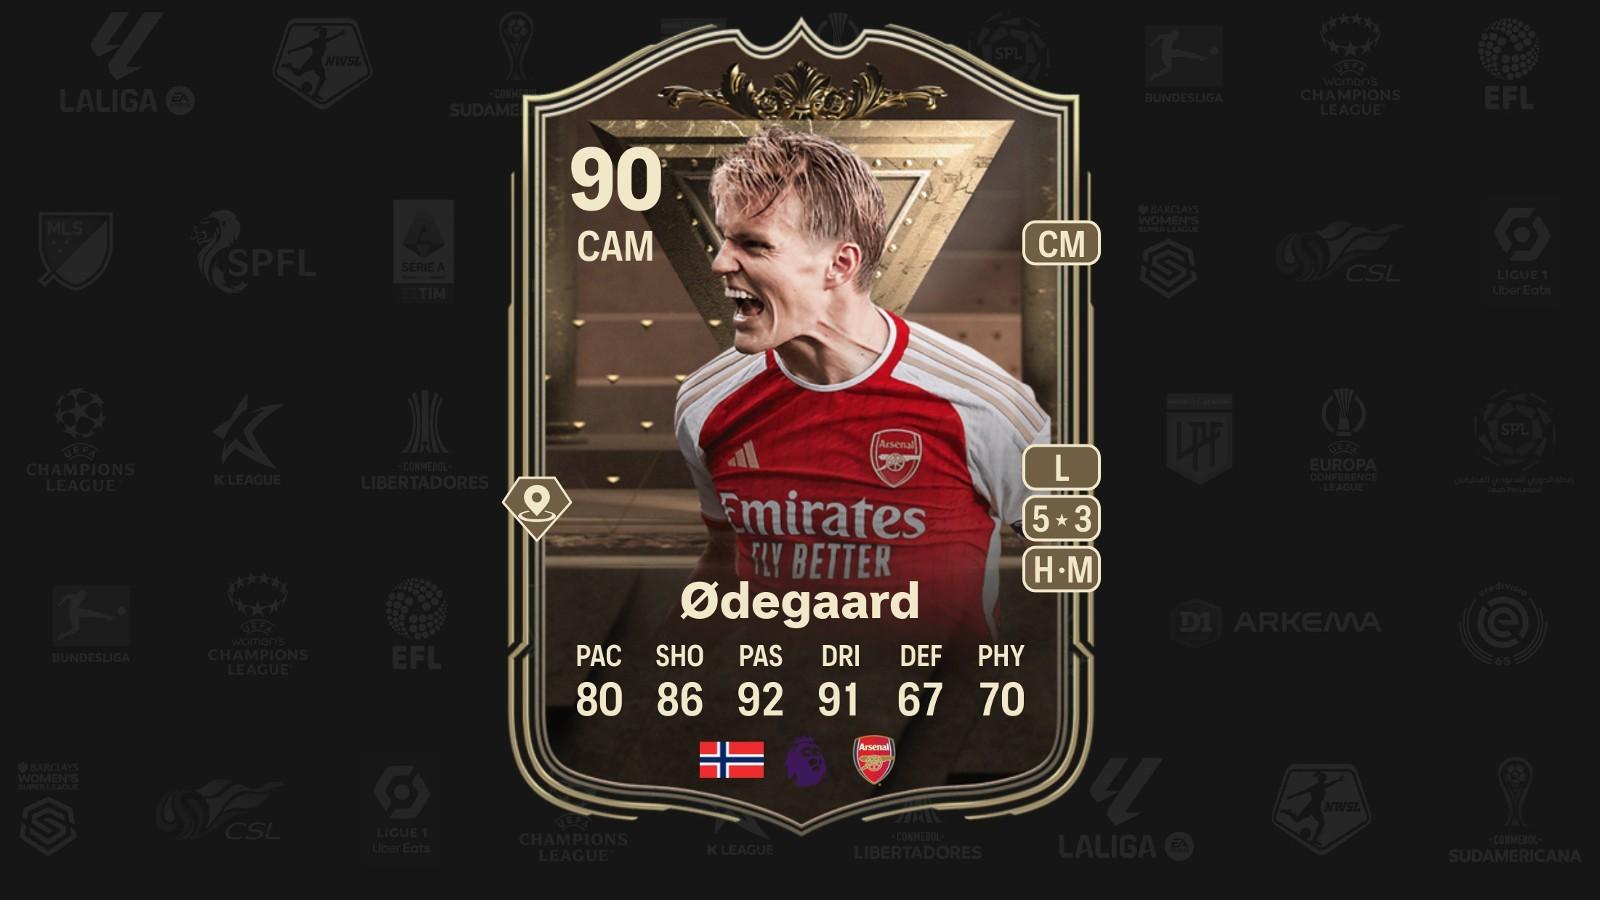 FUT Sheriff - Odegaard 🇳🇴 is coming as SBC during FUT